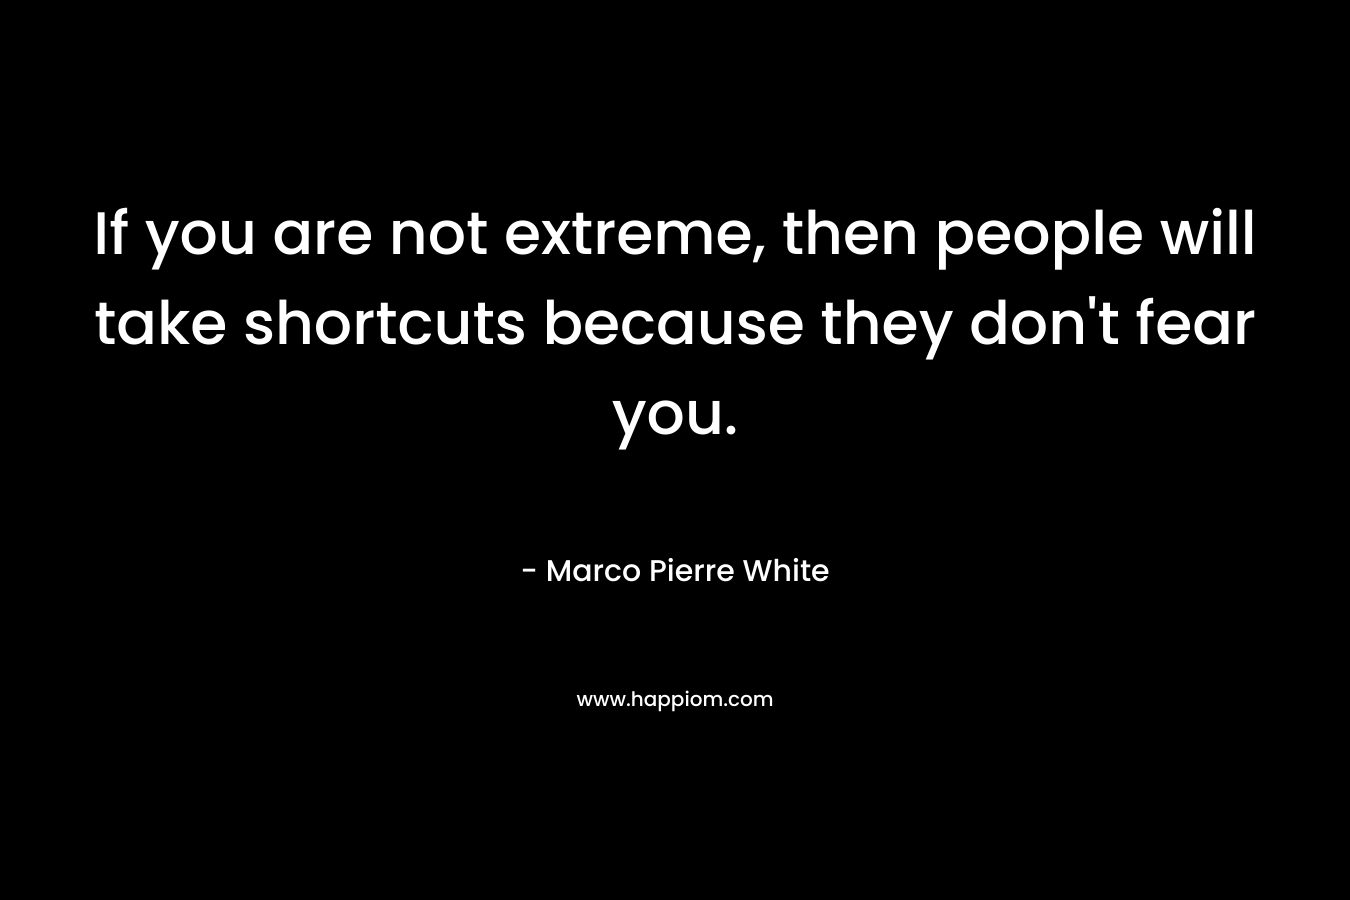 If you are not extreme, then people will take shortcuts because they don't fear you.